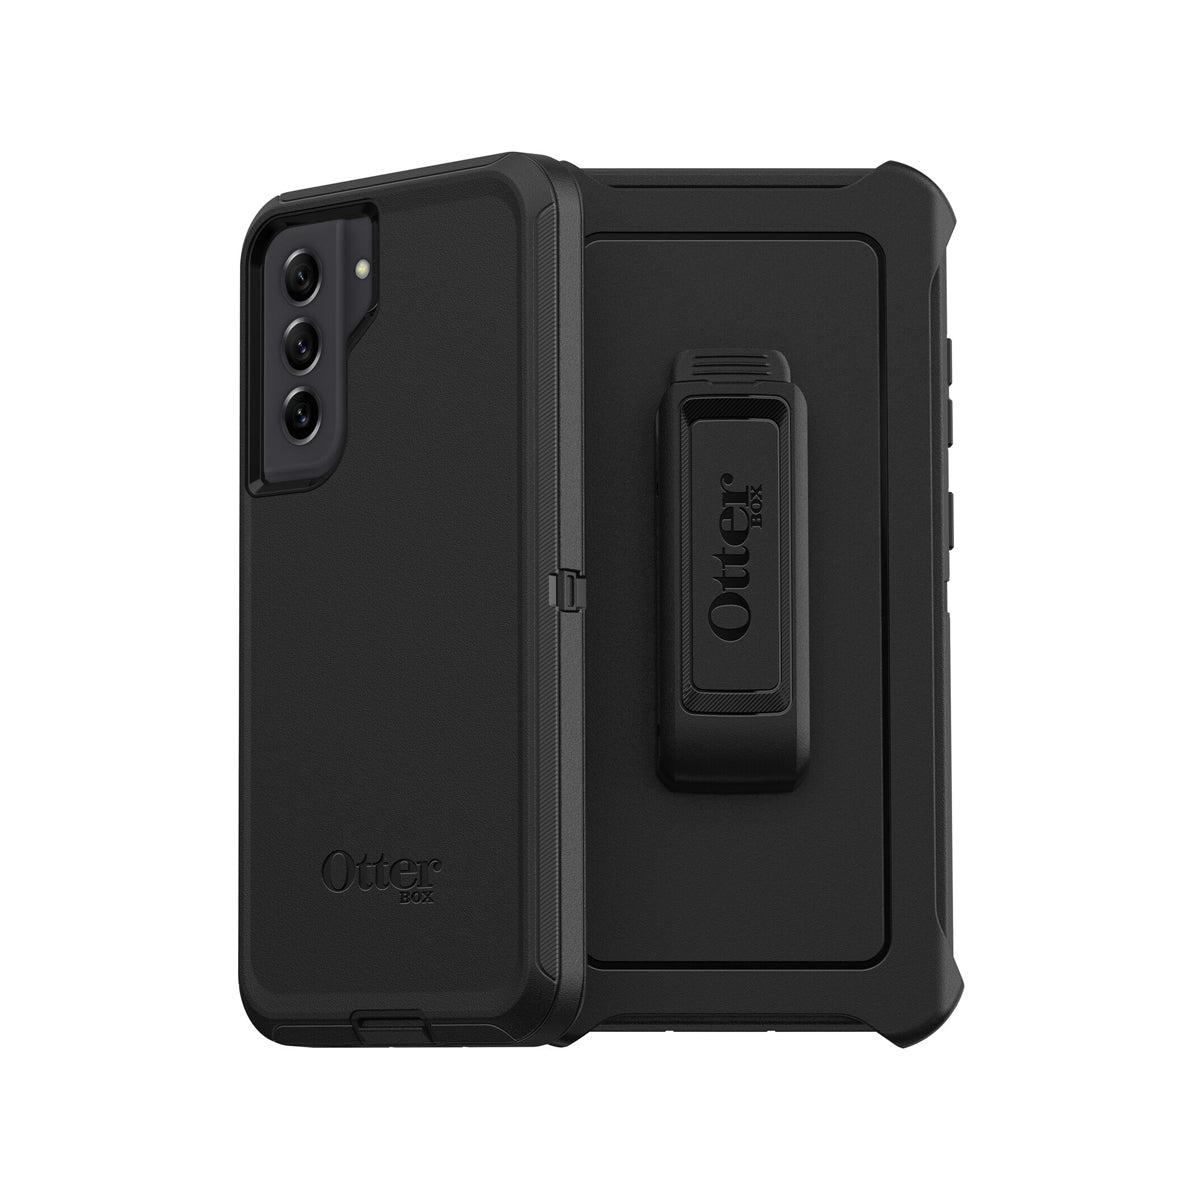 Otterbox Defender Phone Case for Samsung Galaxy S21 FE - Black